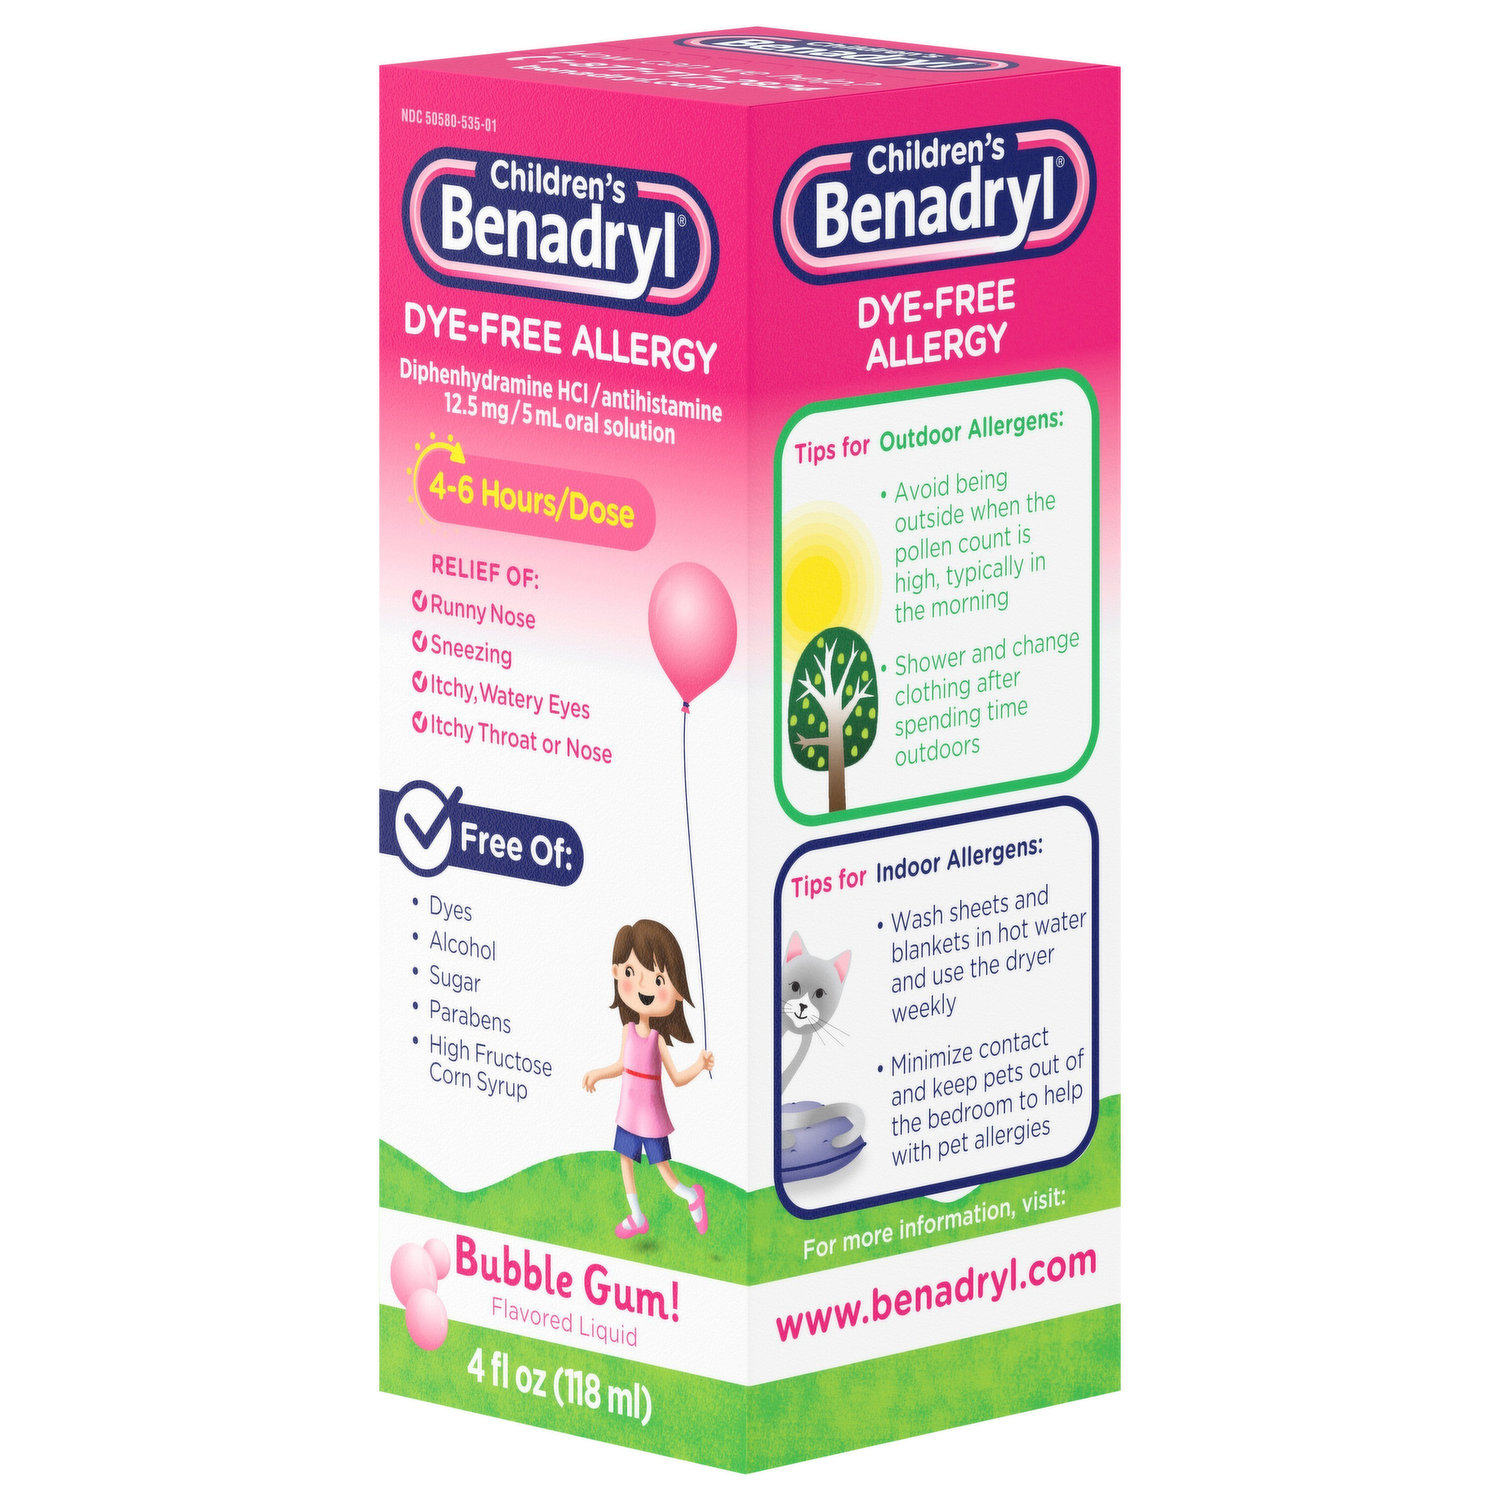 Benadryl Allergy Oral Uses Side Effects Interactions Pictures Warnings   Dosing  WebMD